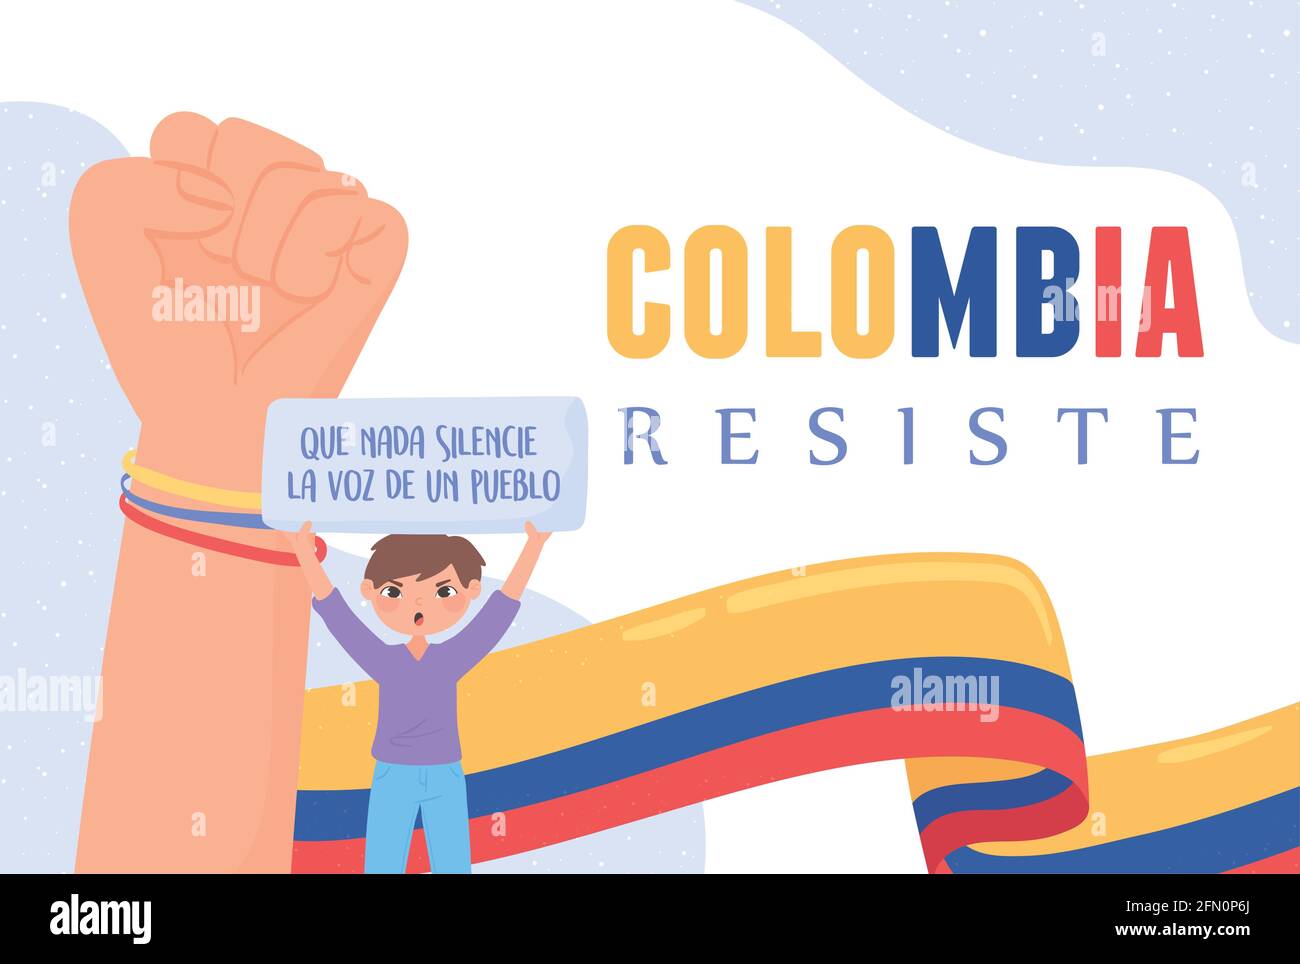 Colombia resists protest Stock Vector